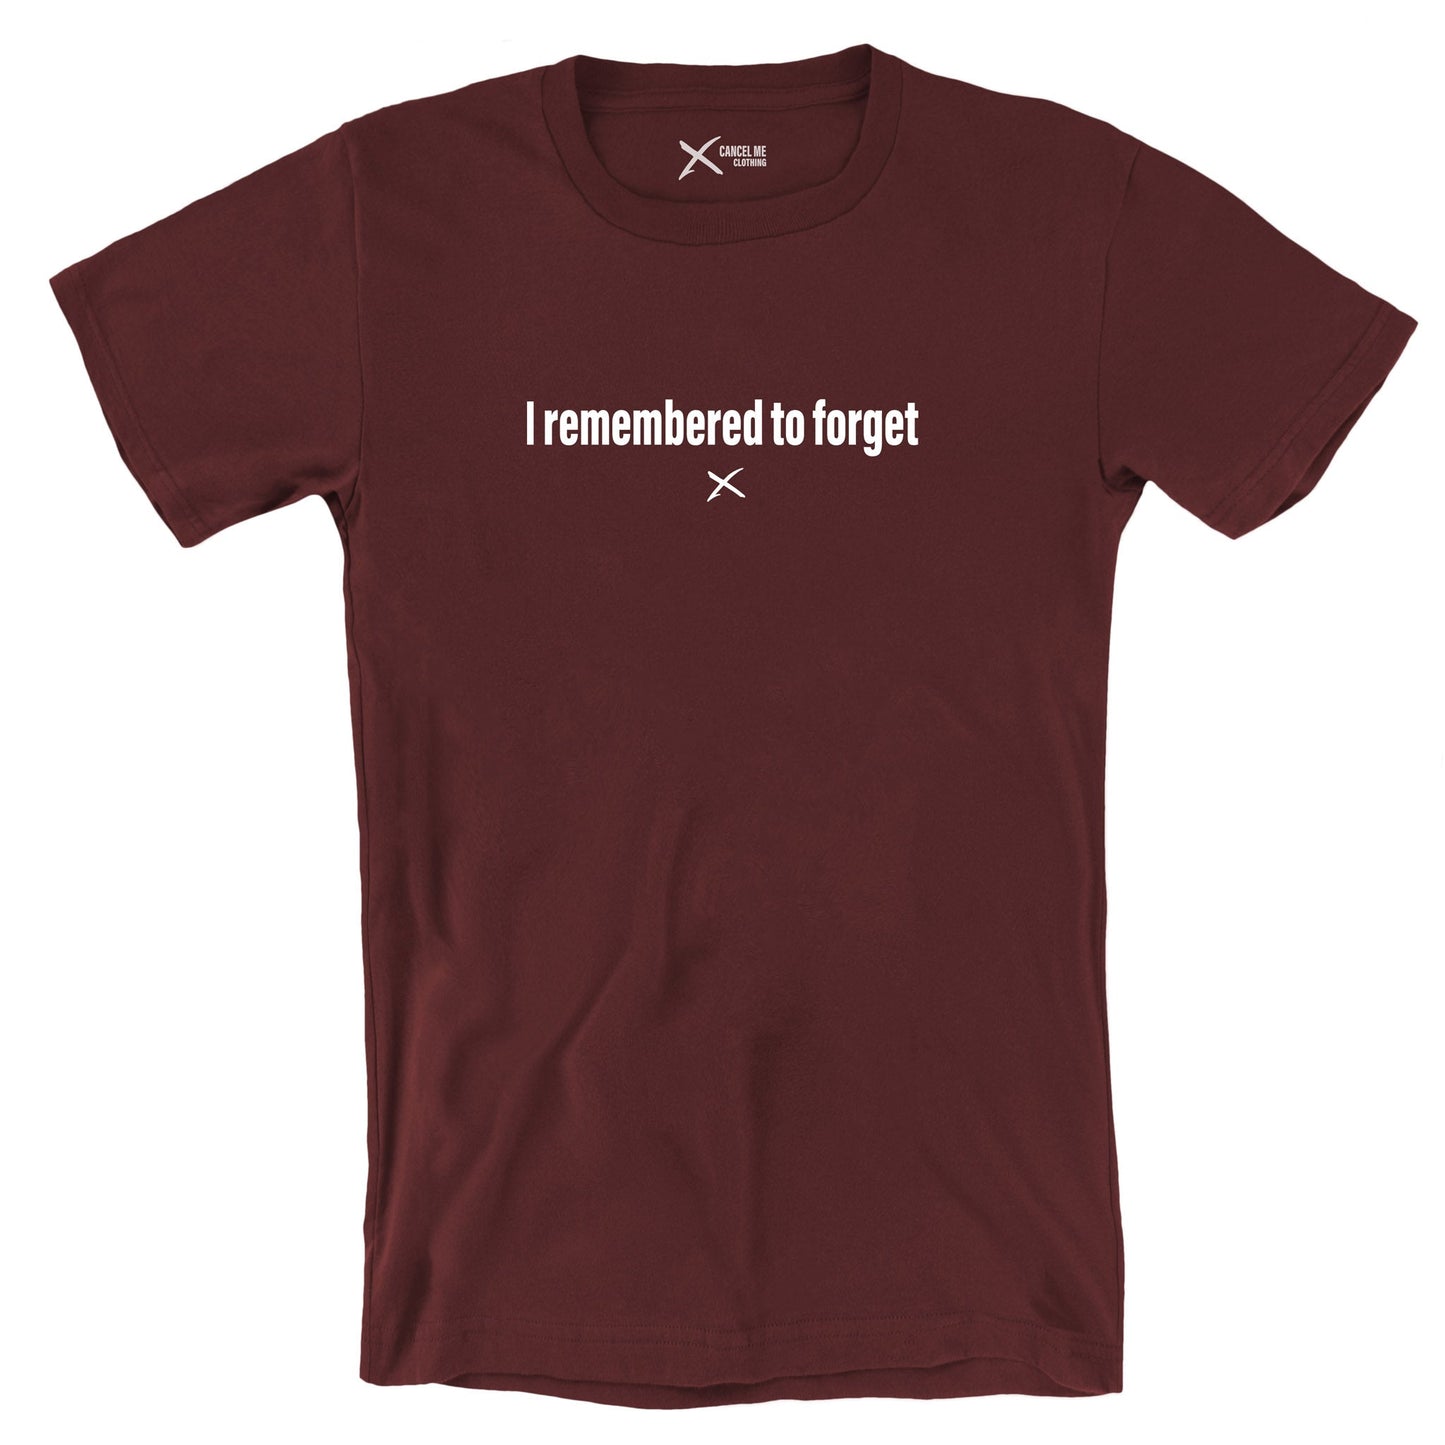 I remembered to forget - Shirt